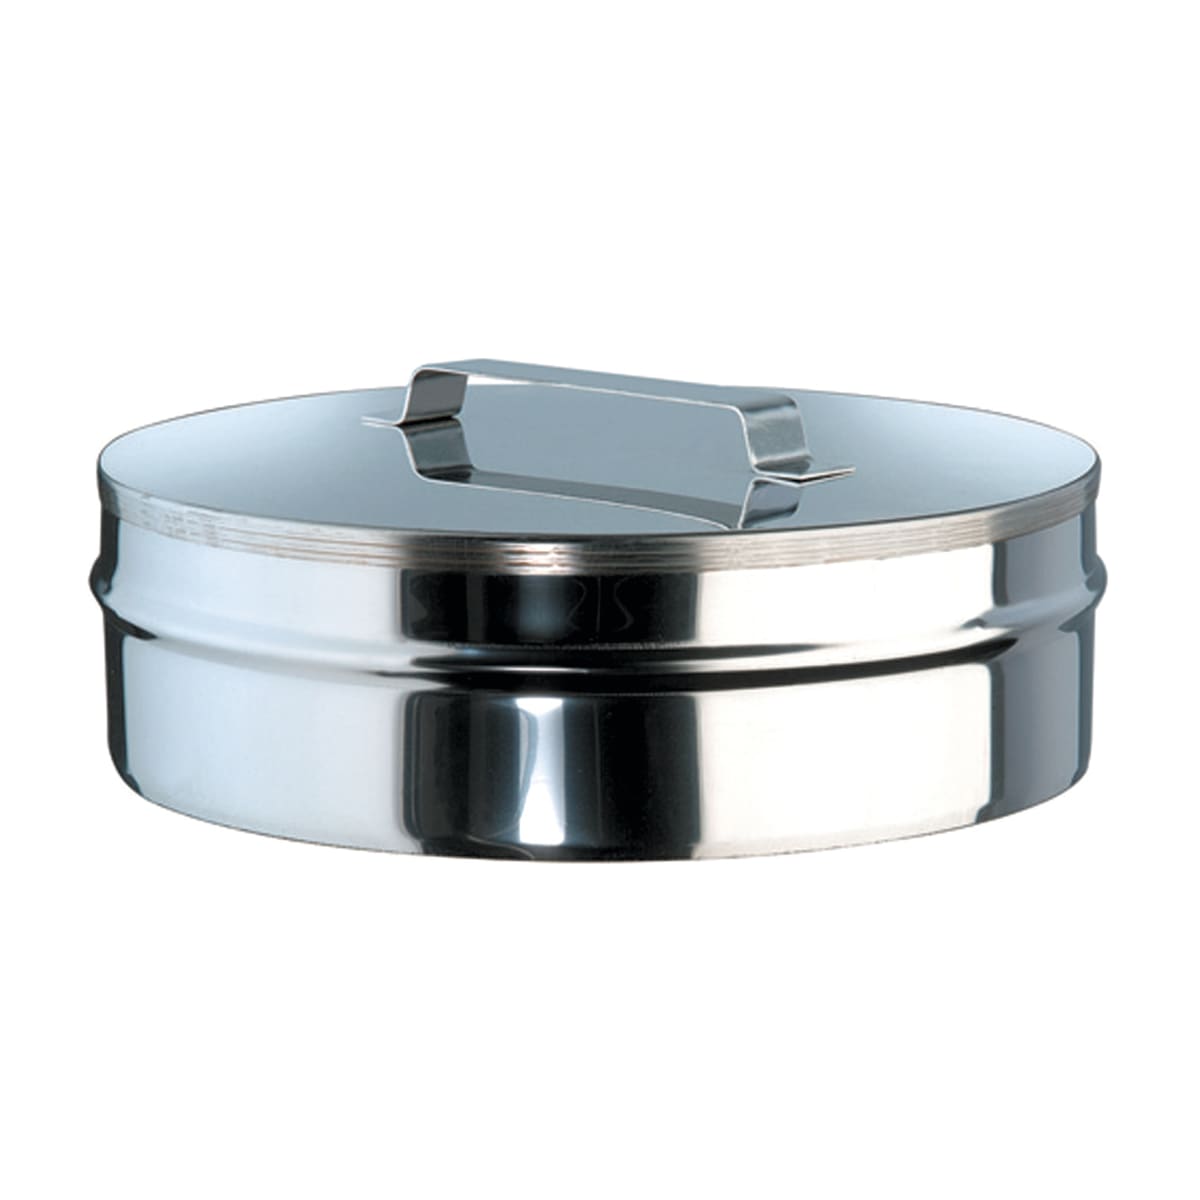 DP COIB D80 STAINLESS STEEL BLIND PLUG